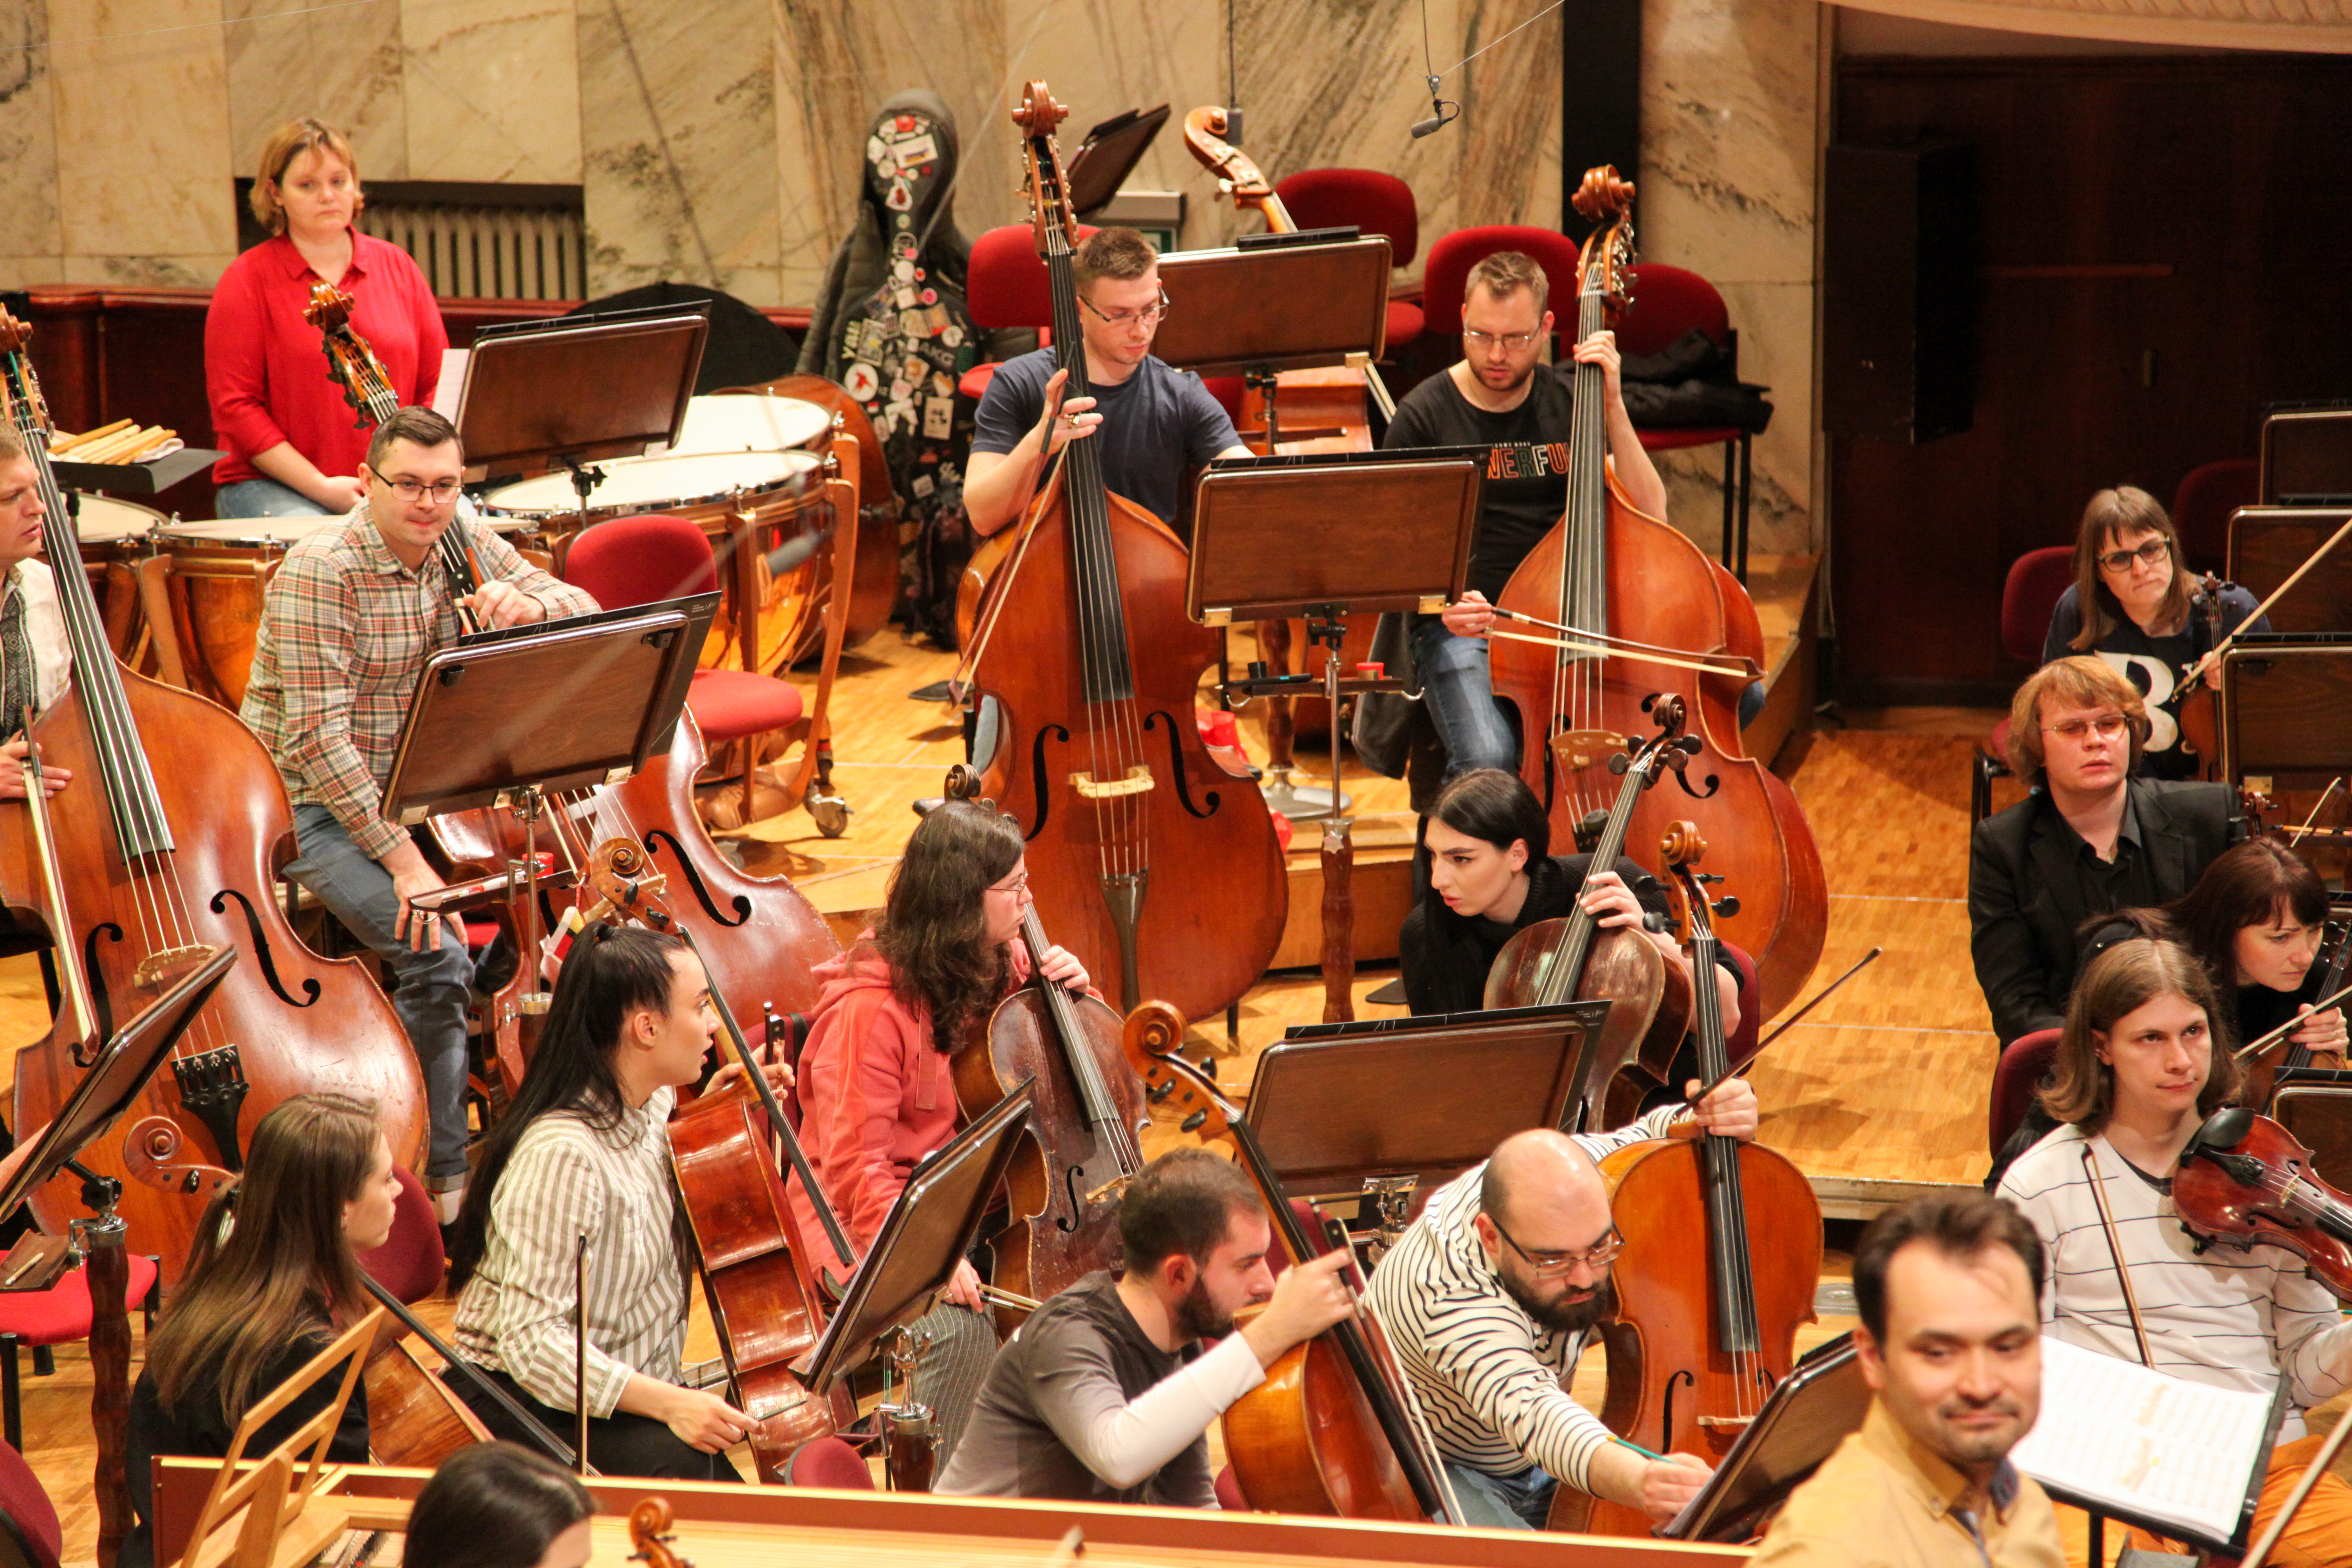 The Kyiv Symphony Orchestra rehearses at the National Philharmonic in Warsaw, Poland, the day before the premiere performance of the 